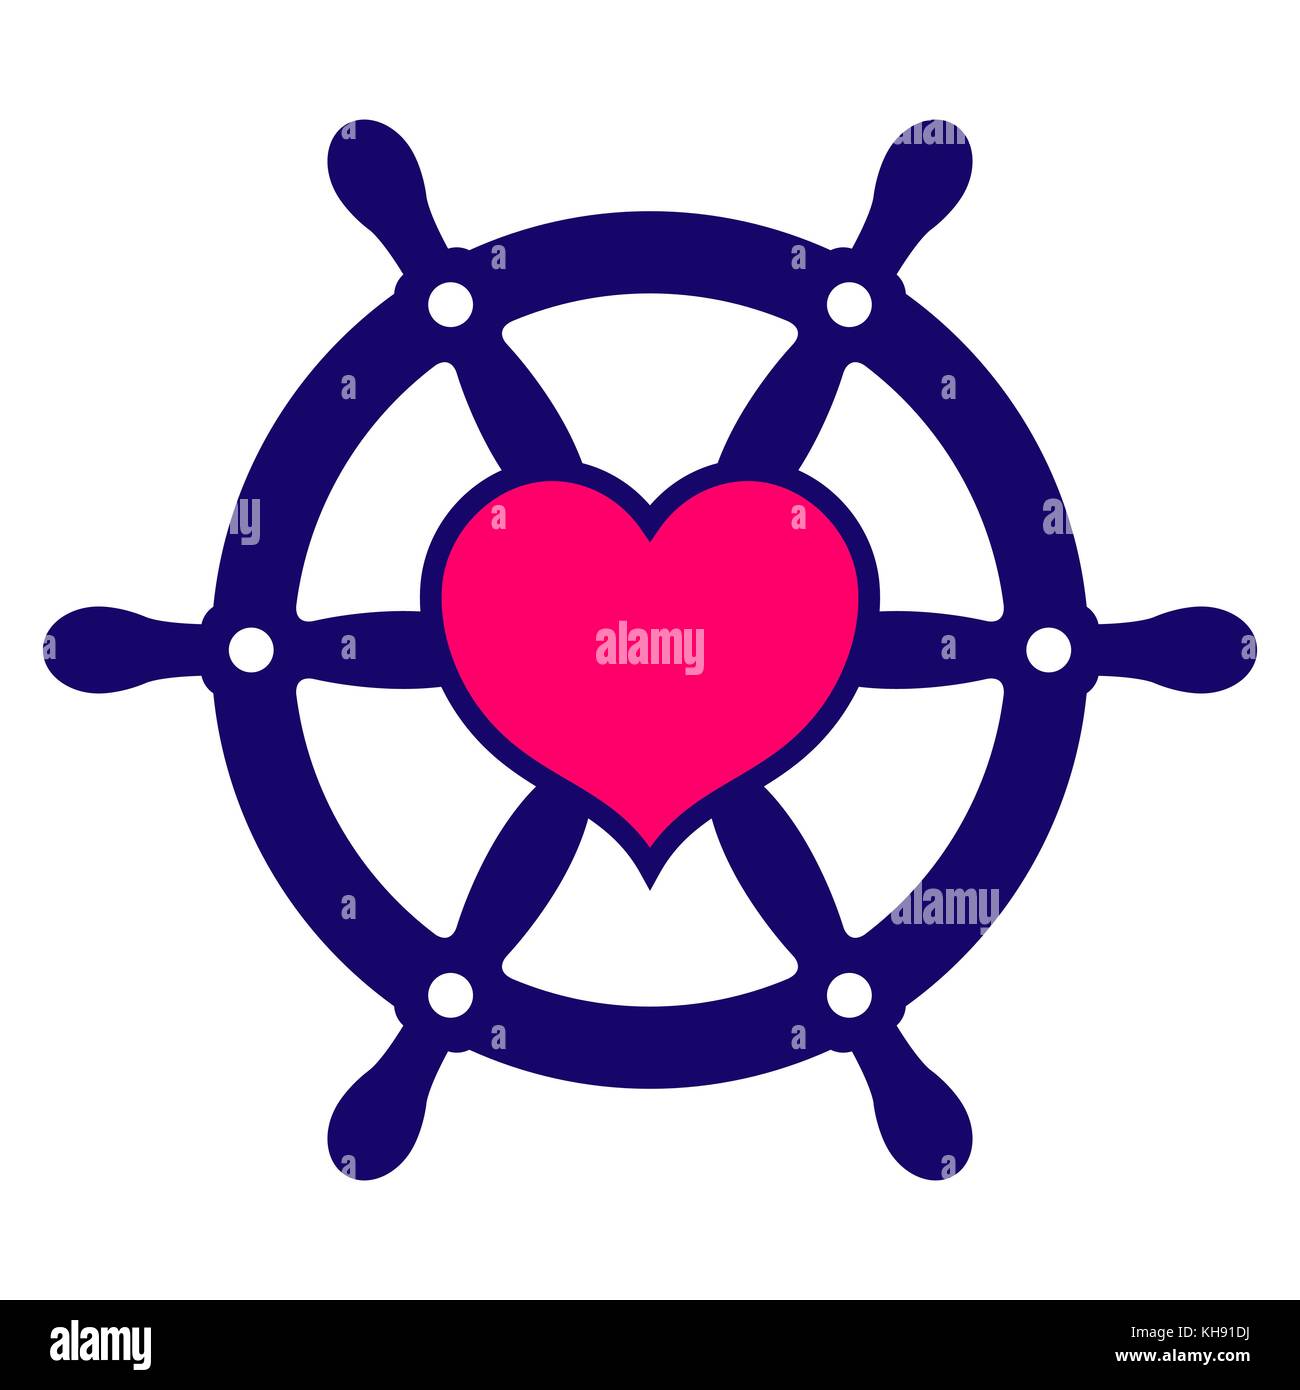 Navy colored ship steering wheel icon with pink heart at centre of wheel depicting search for love for use as a design element, vector illustration Stock Vector